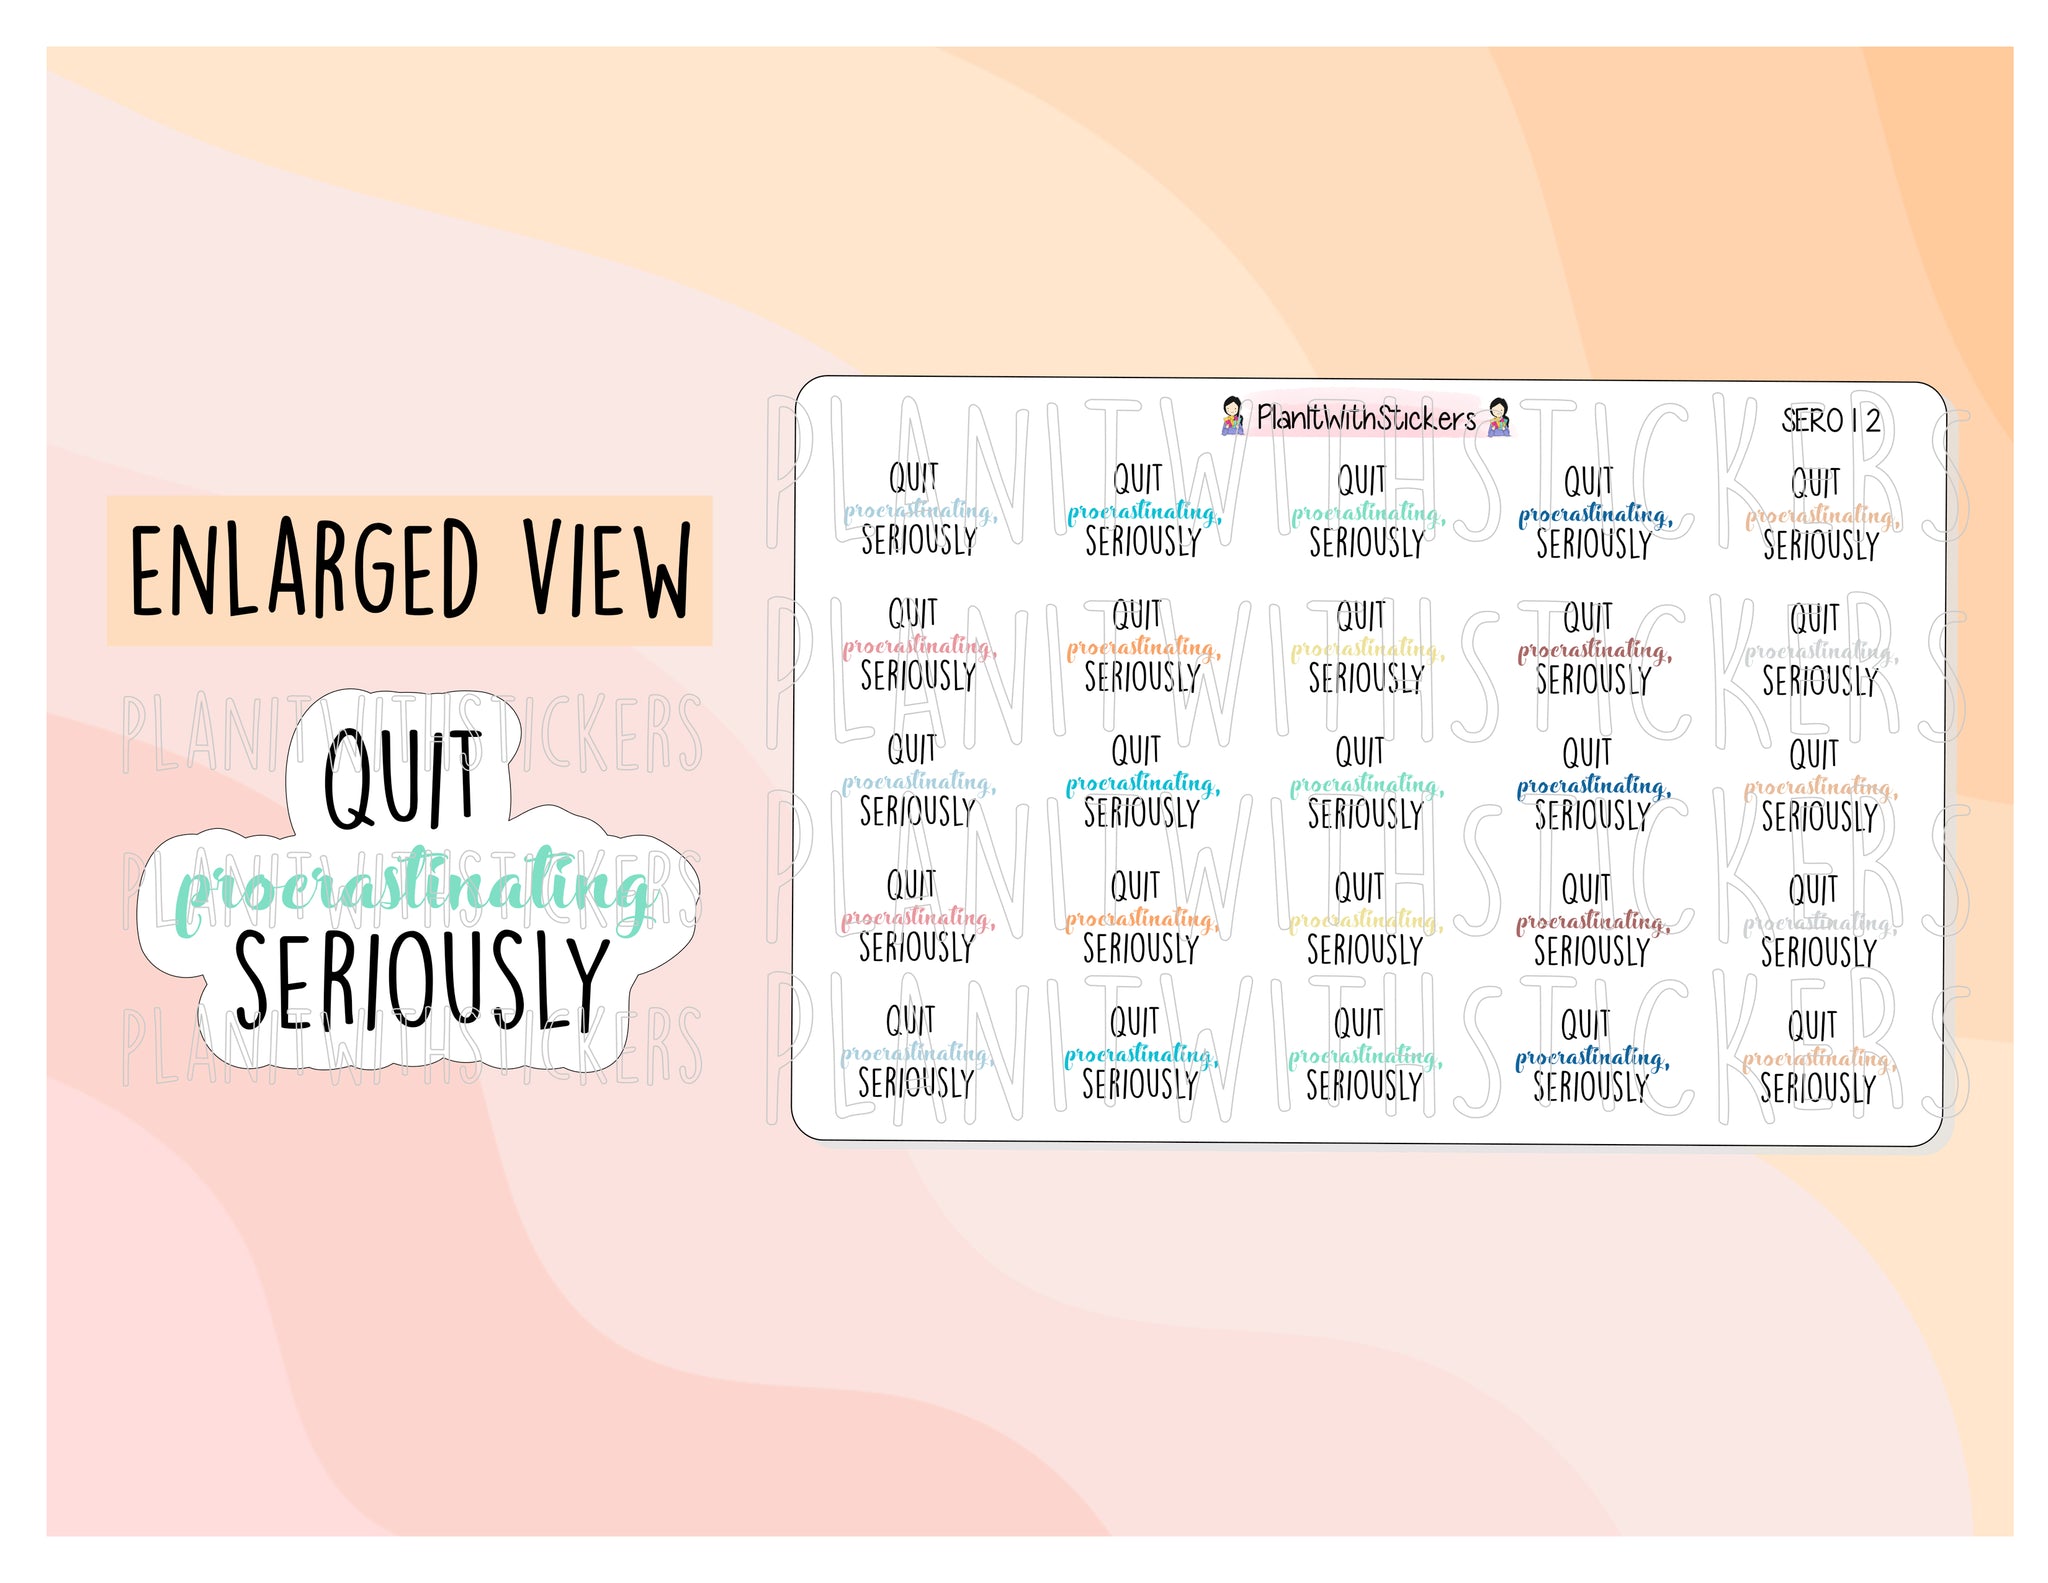 SER012 | Quit Procrastinating, Seriously' SERIOUSLY Series Sassy Quotes Planner Stickers for your planner